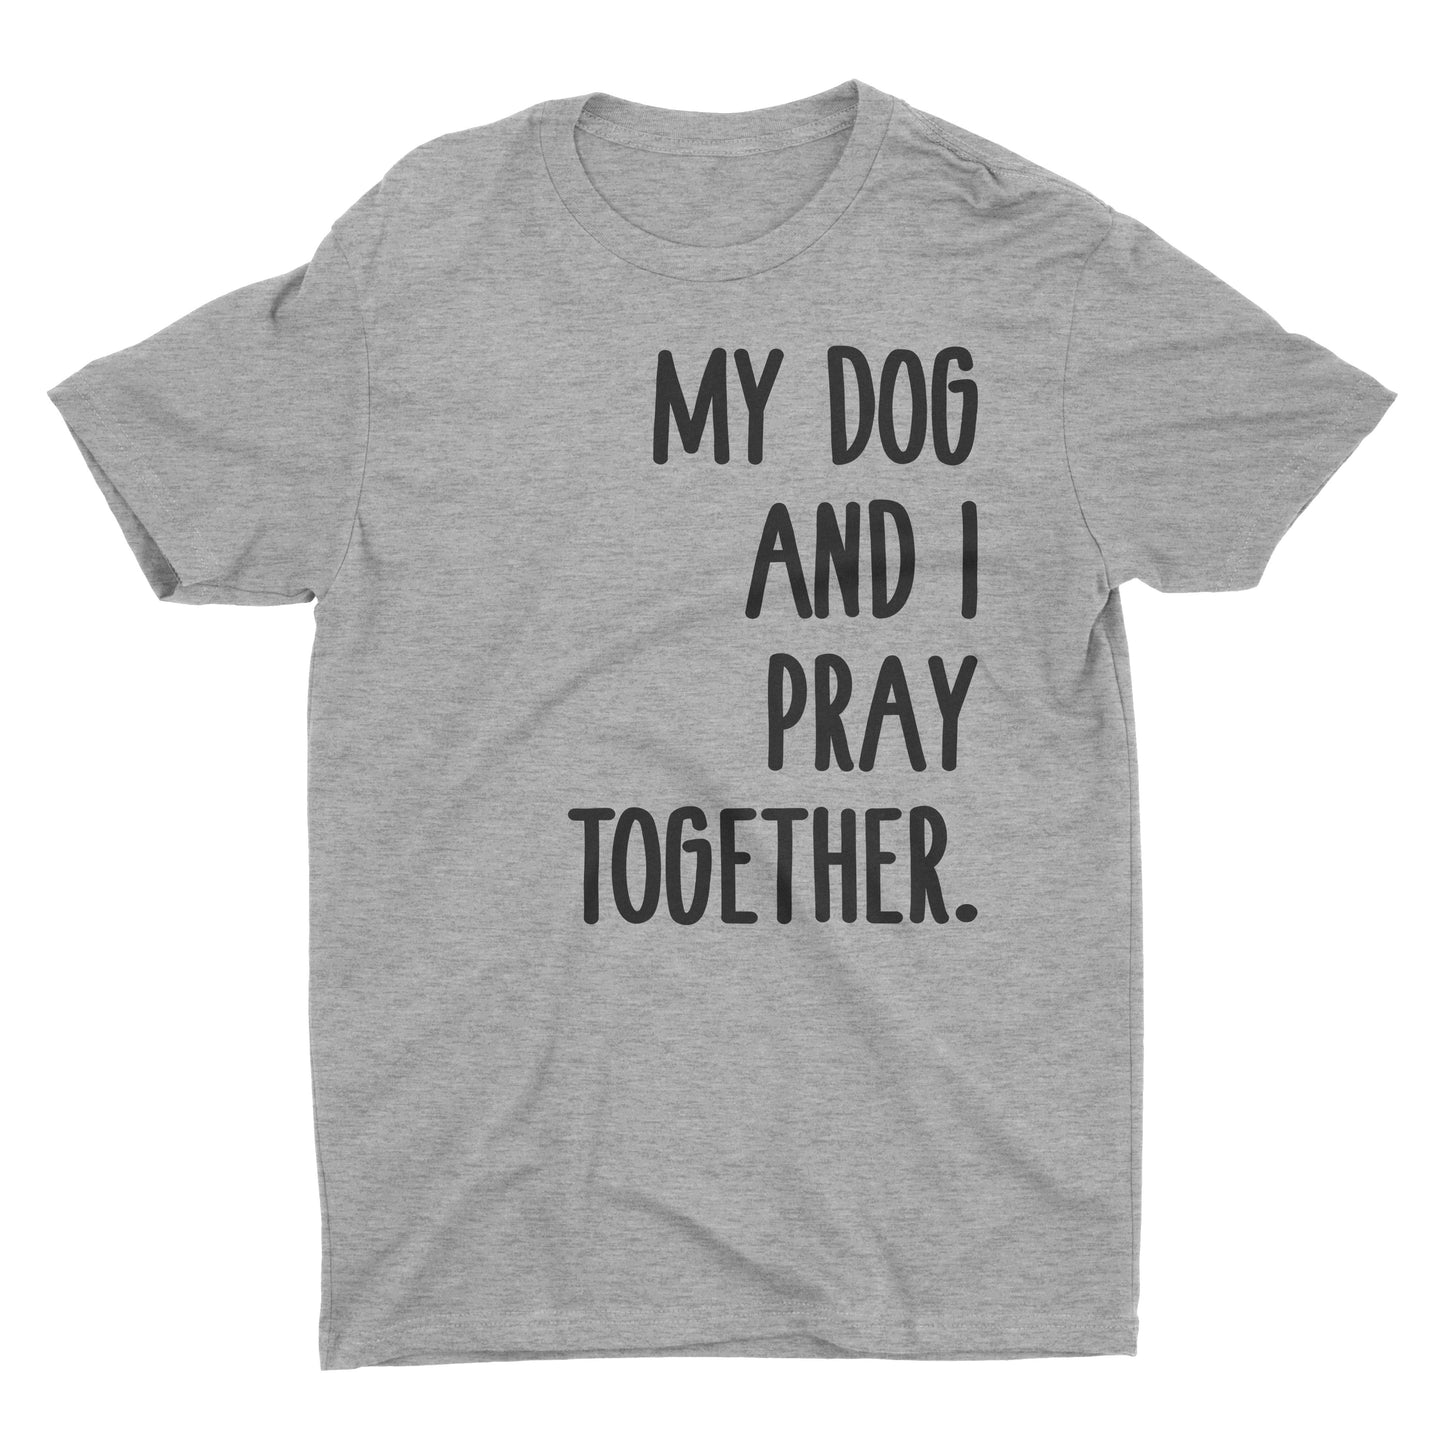 My Dog And I Pray Together.